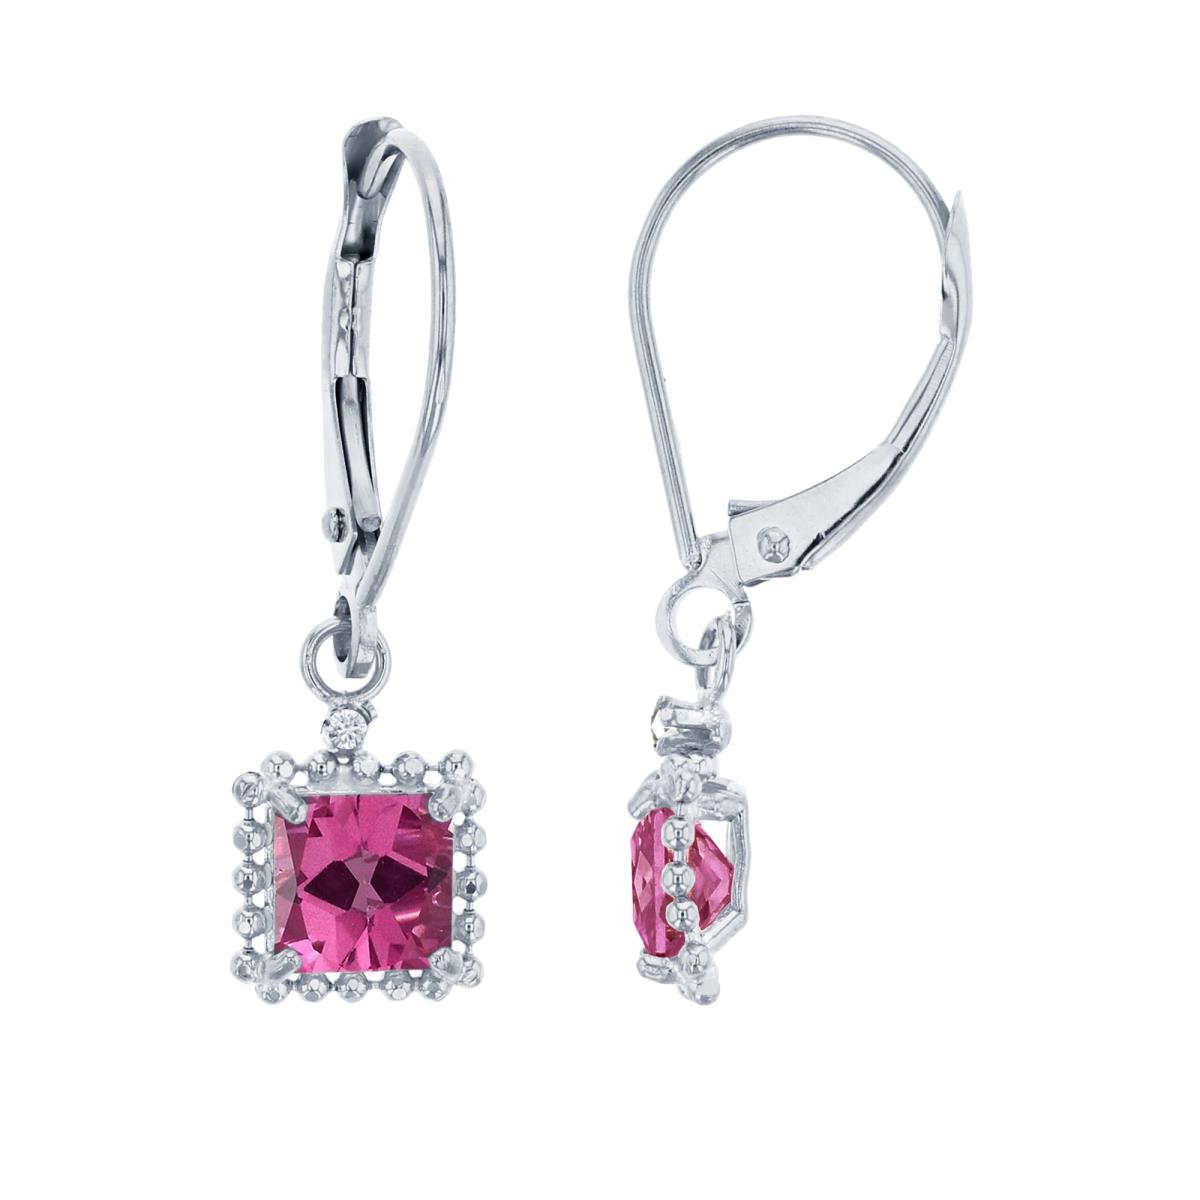 14K White Gold 1.25mm Rd White Topaz & 5mm Sq Pure Pink Bead Frame Drop Lever-Back Earring